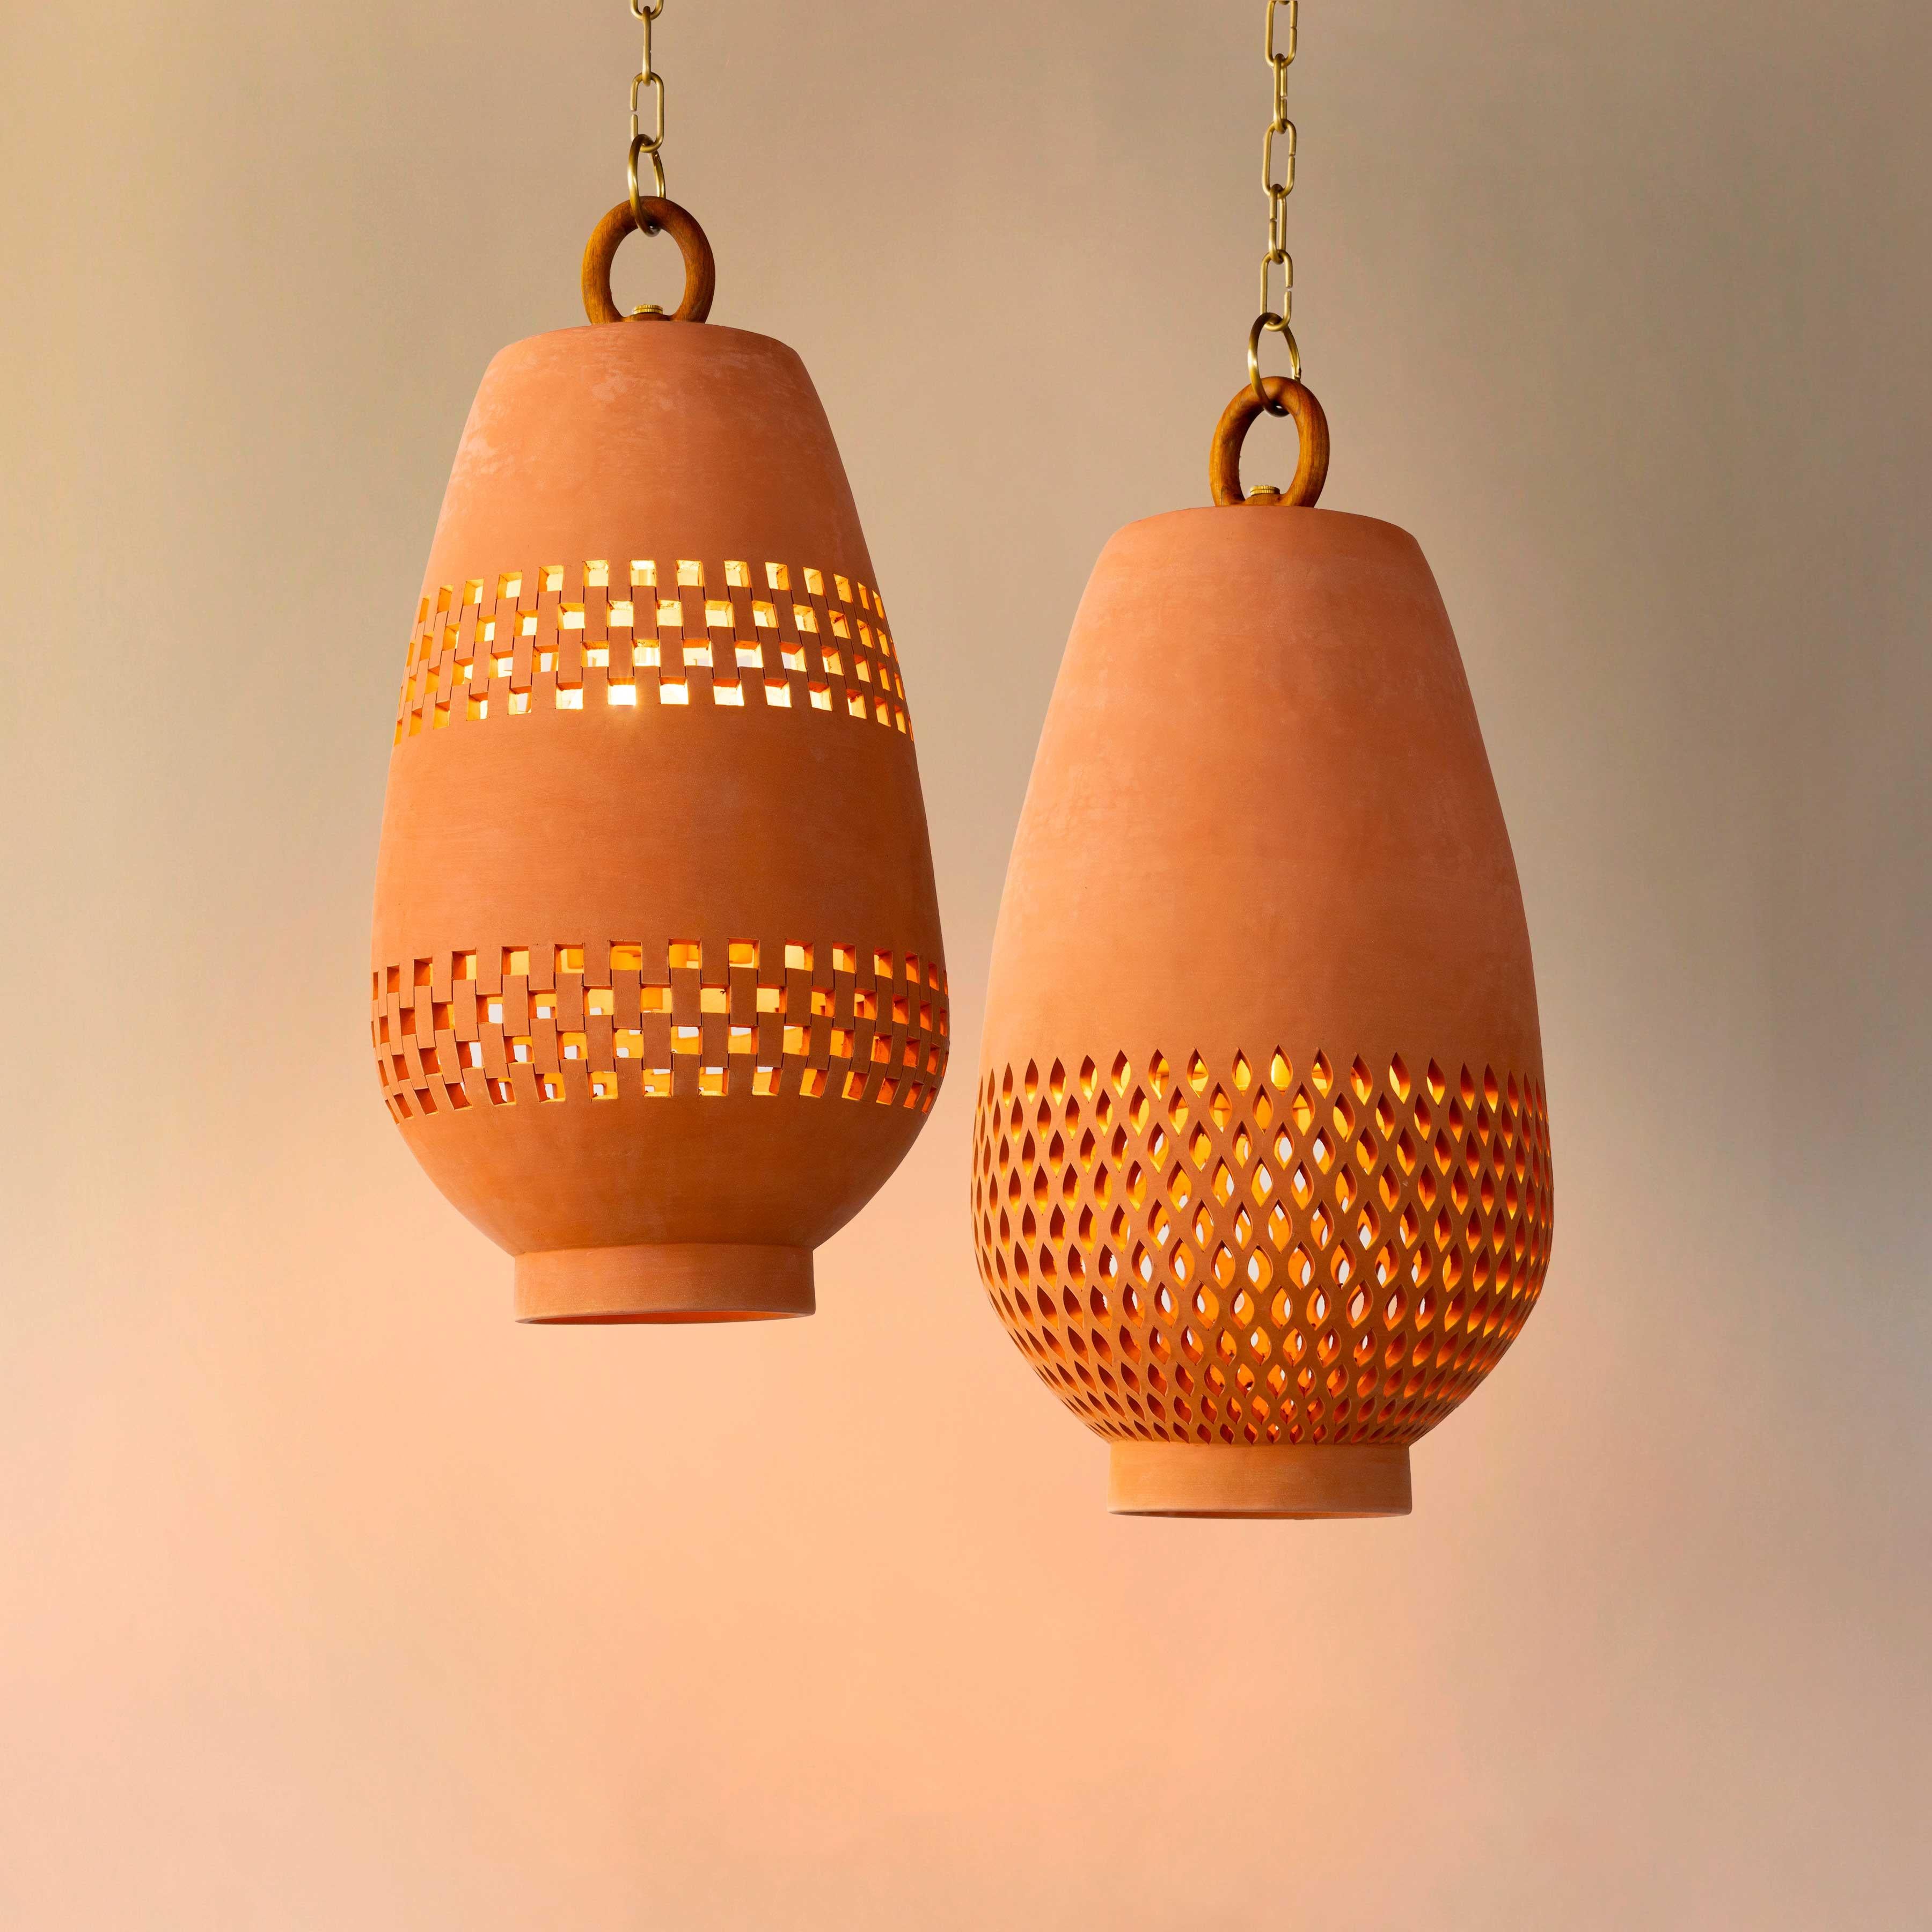 Mexican Terracotta Ceramic Pendant Light XL, Brushed Brass, Ajedrez Atzompa Collection For Sale